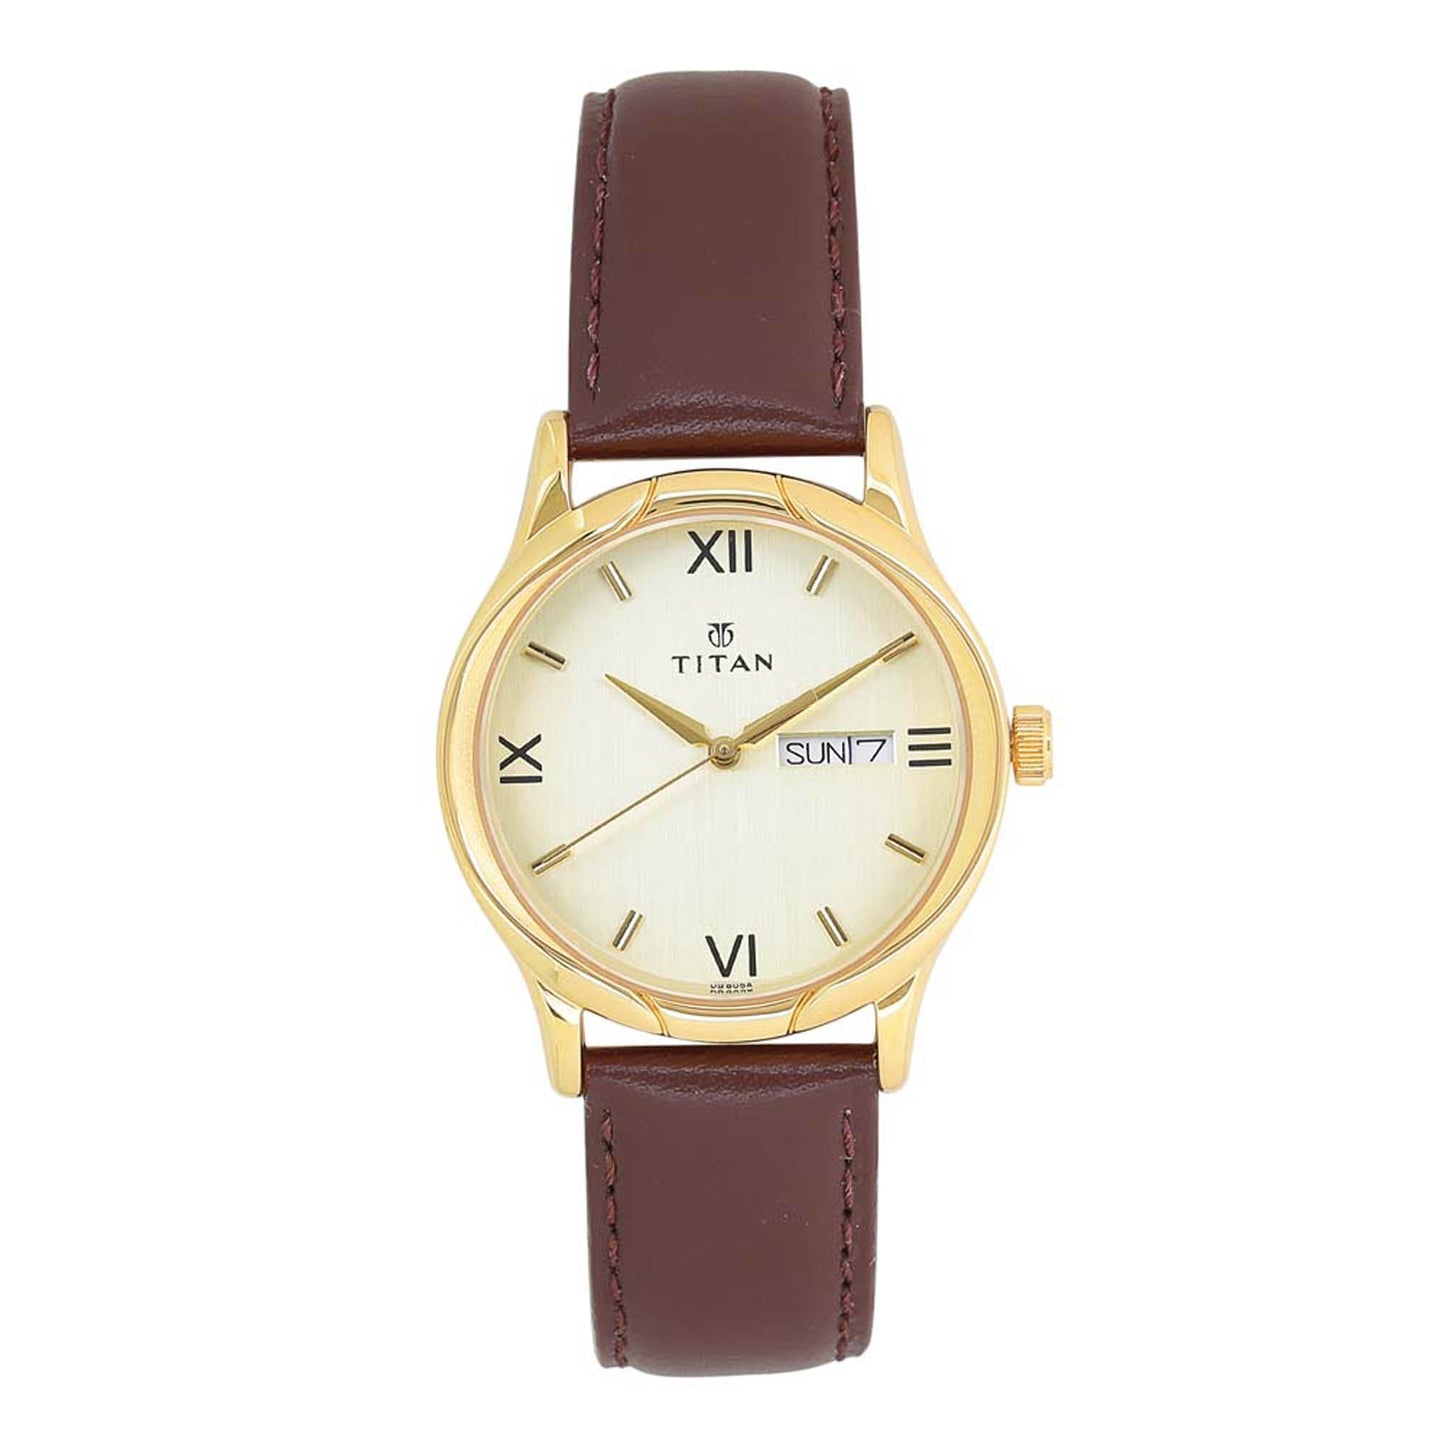 Titan Champagne Dial Analog Day and Date Leather Strap watch for Men